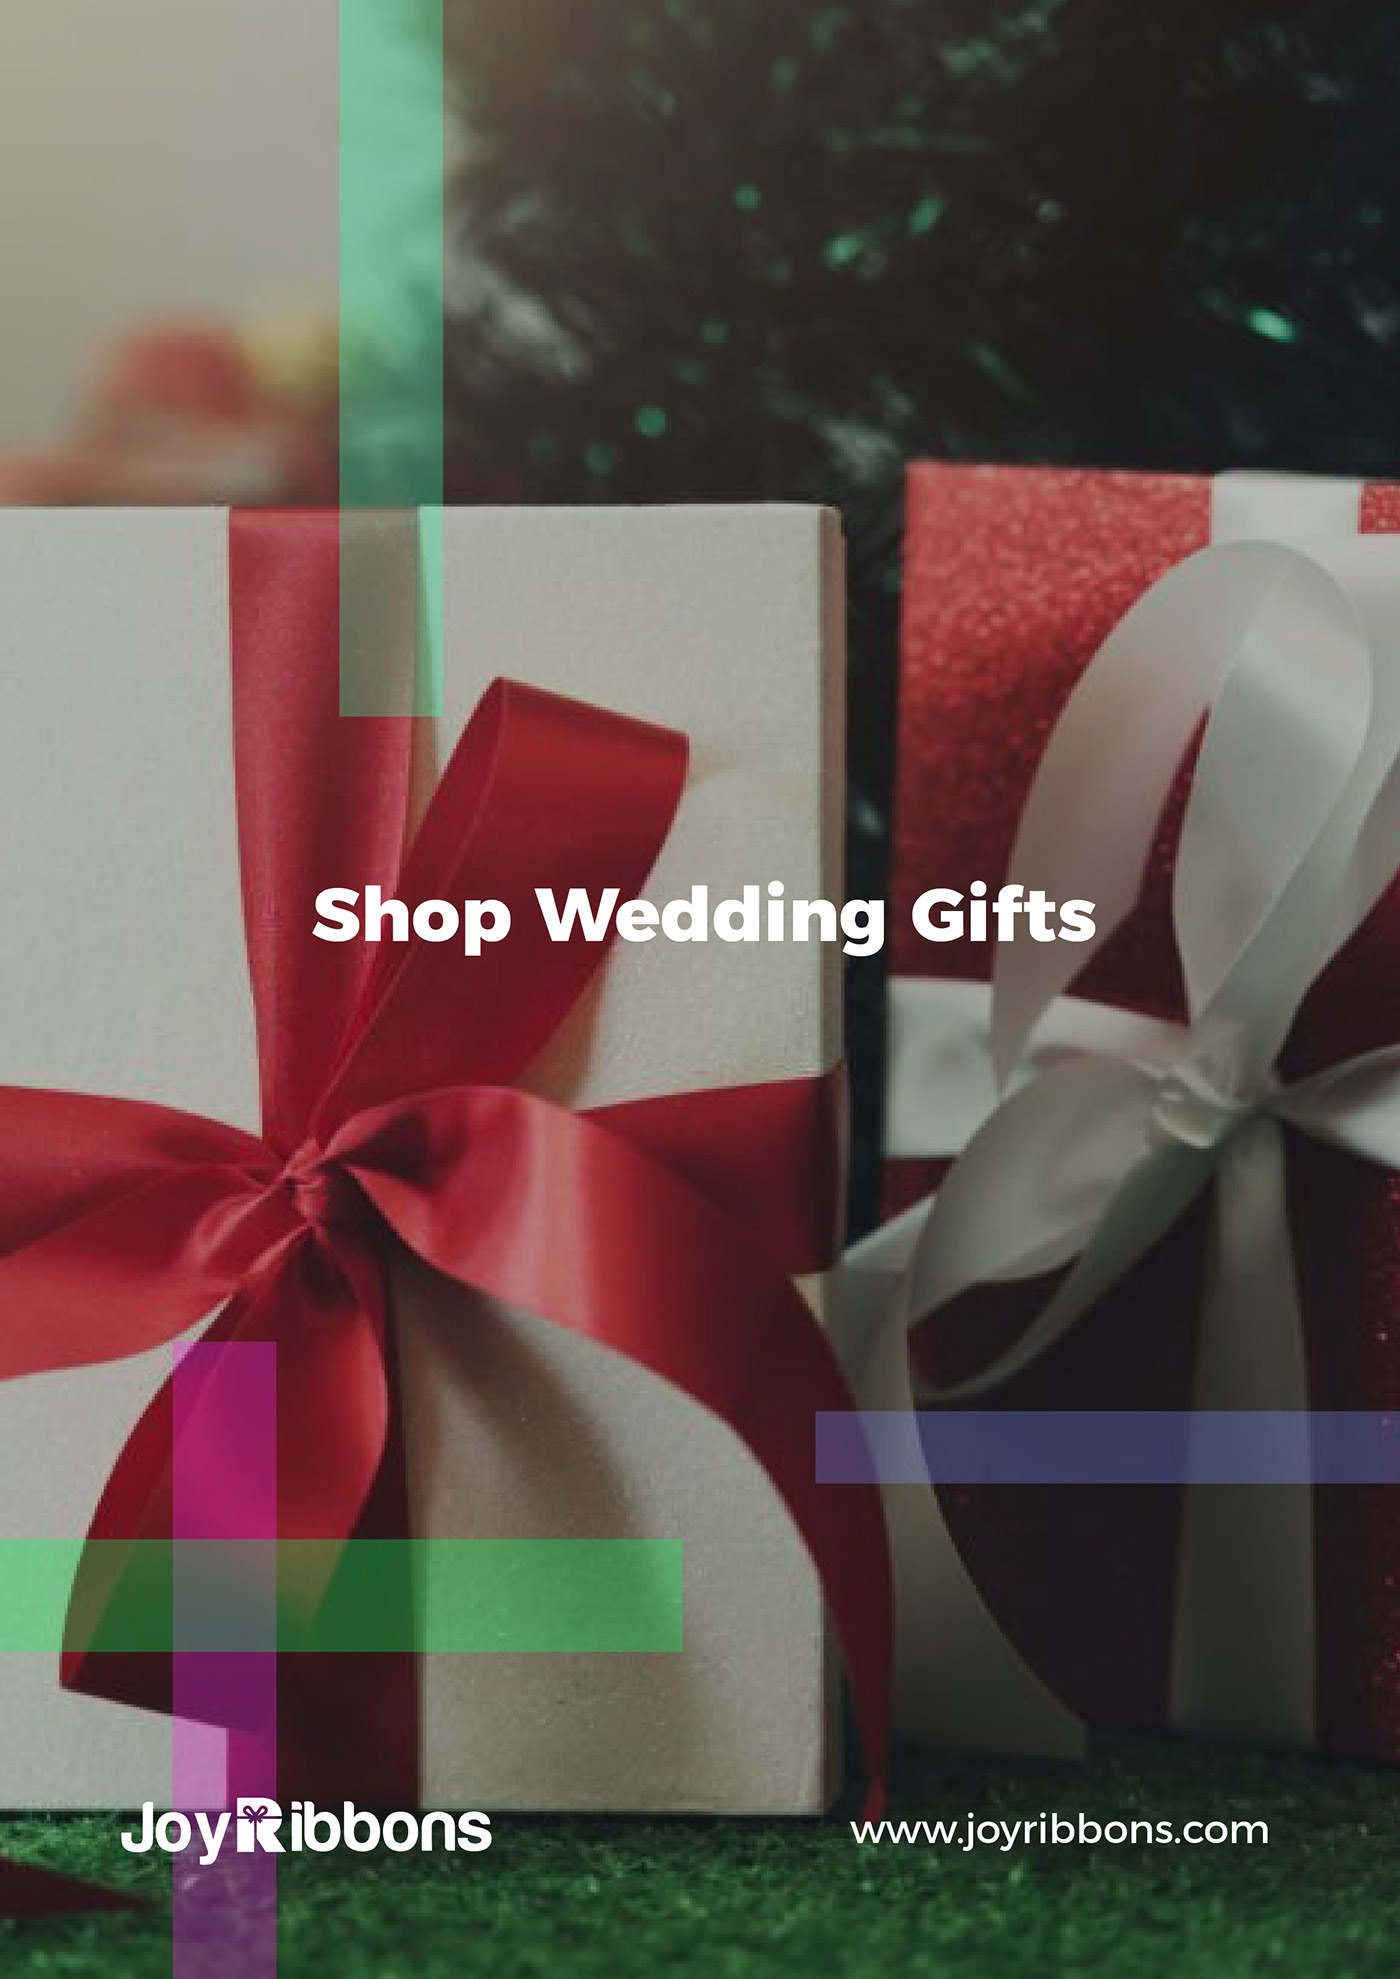 shop wedding gifts for your favorite couple in Nigeria today with JoyRibbons. We deliver anywhere in Nigeria.